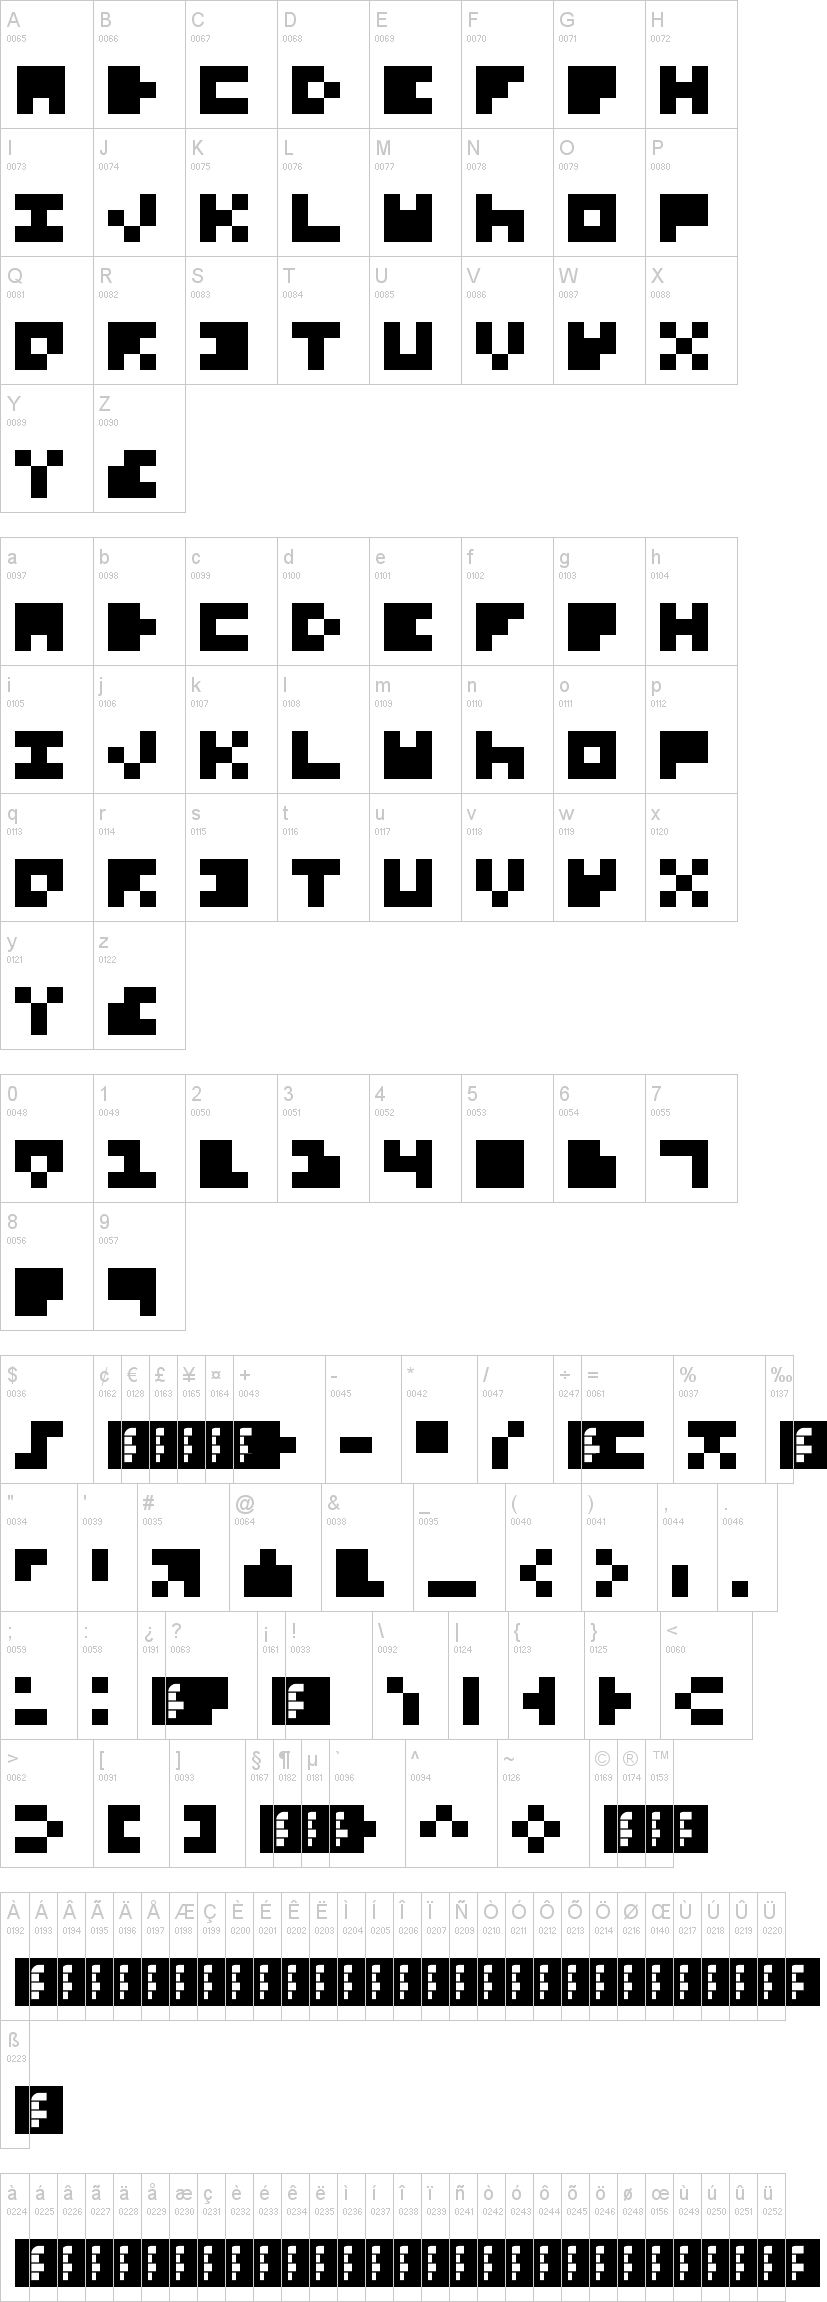 Extremely Small Fonts